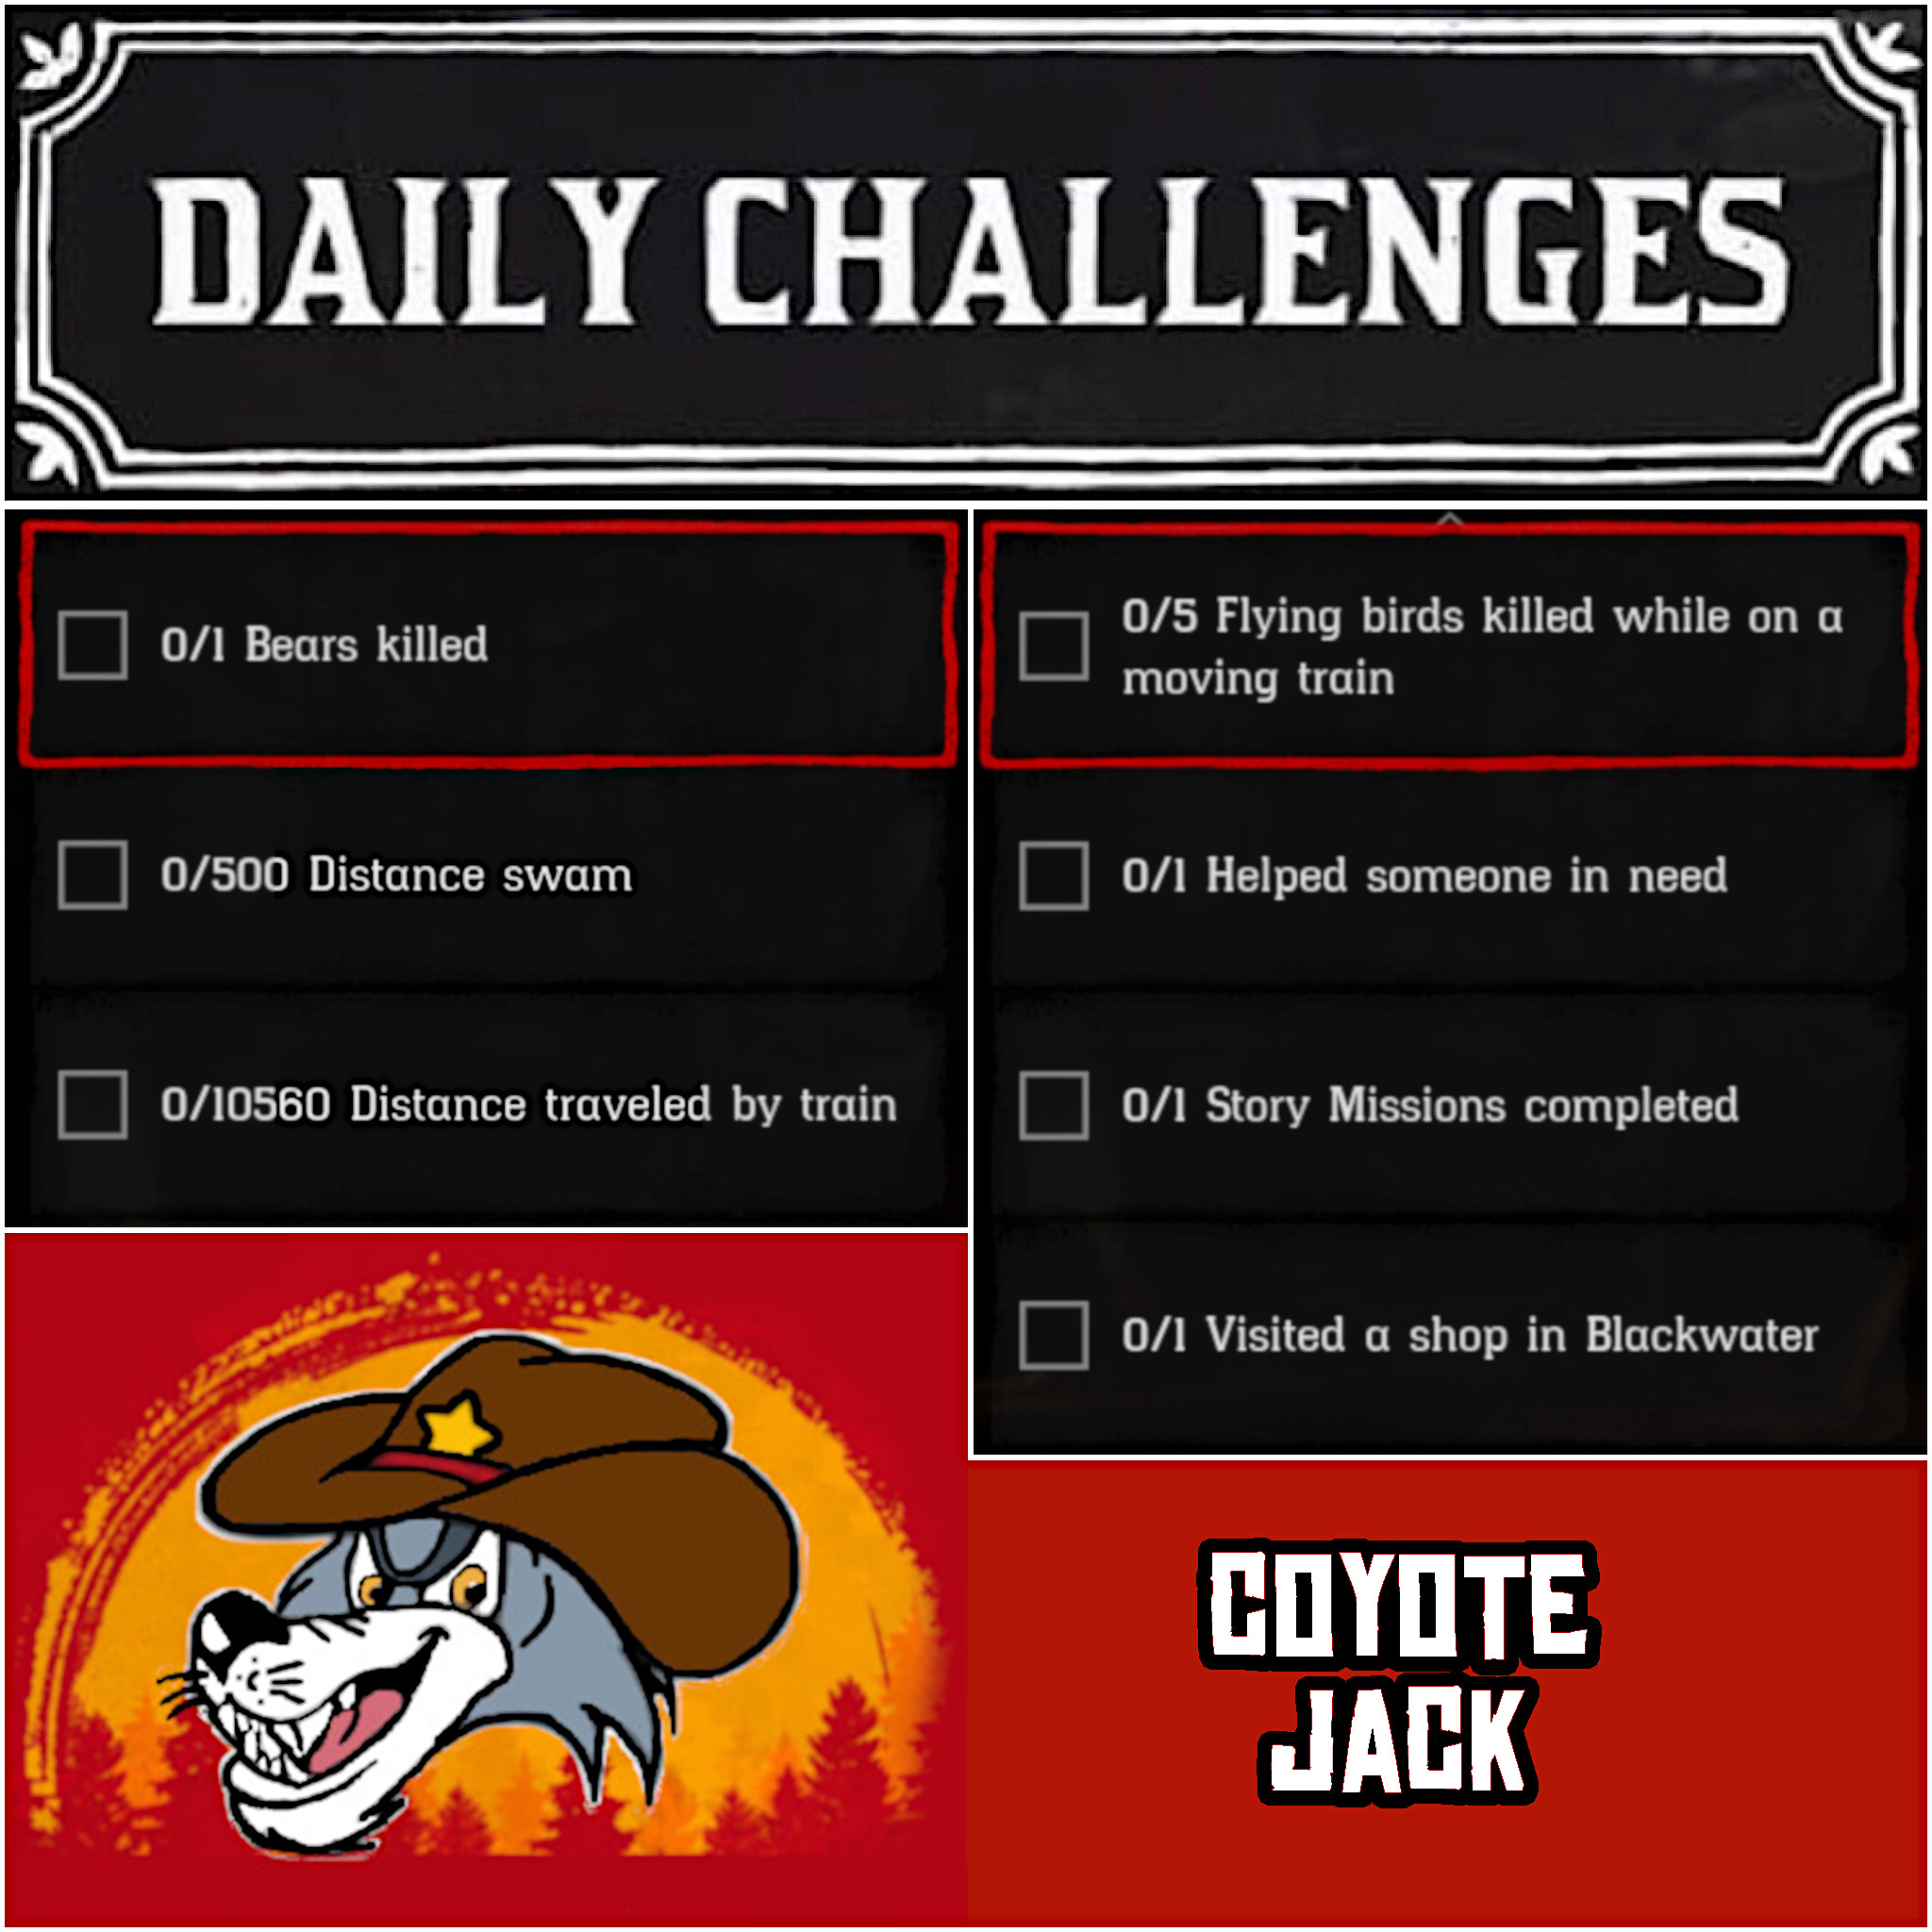 You are currently viewing Thursday 25 March Daily Challenges